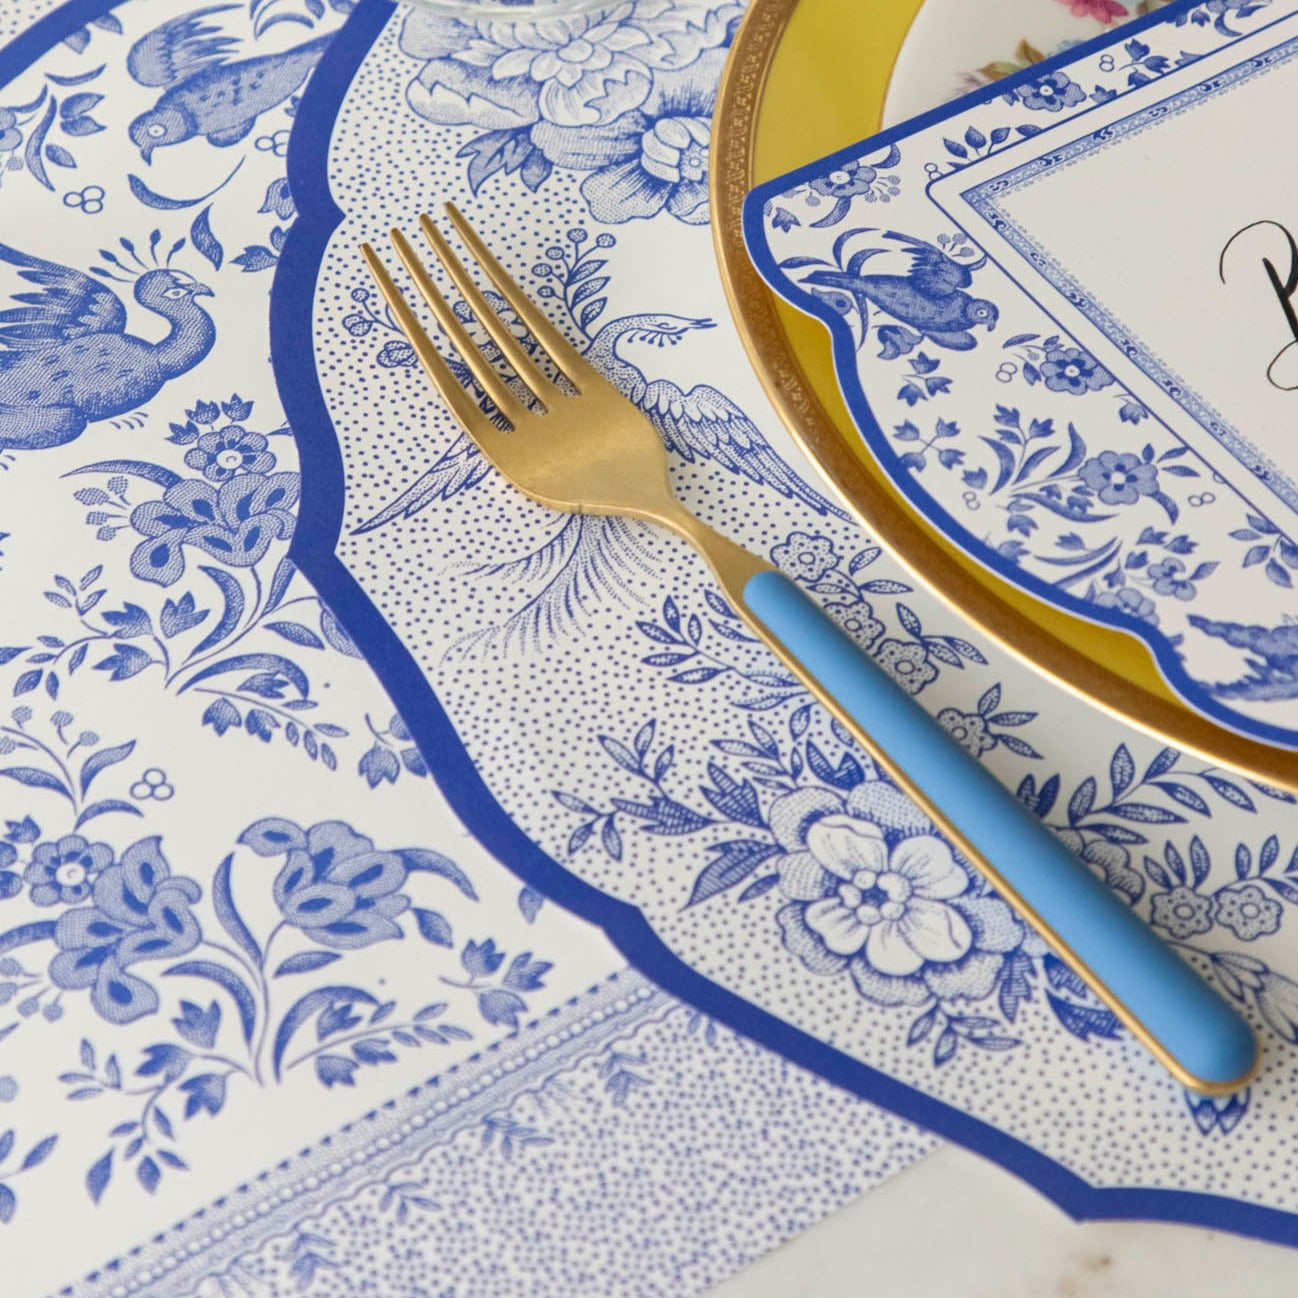 Close-up of the Blue Regal Peacock Runner under an elegant place setting, showing the intricate design in detail.